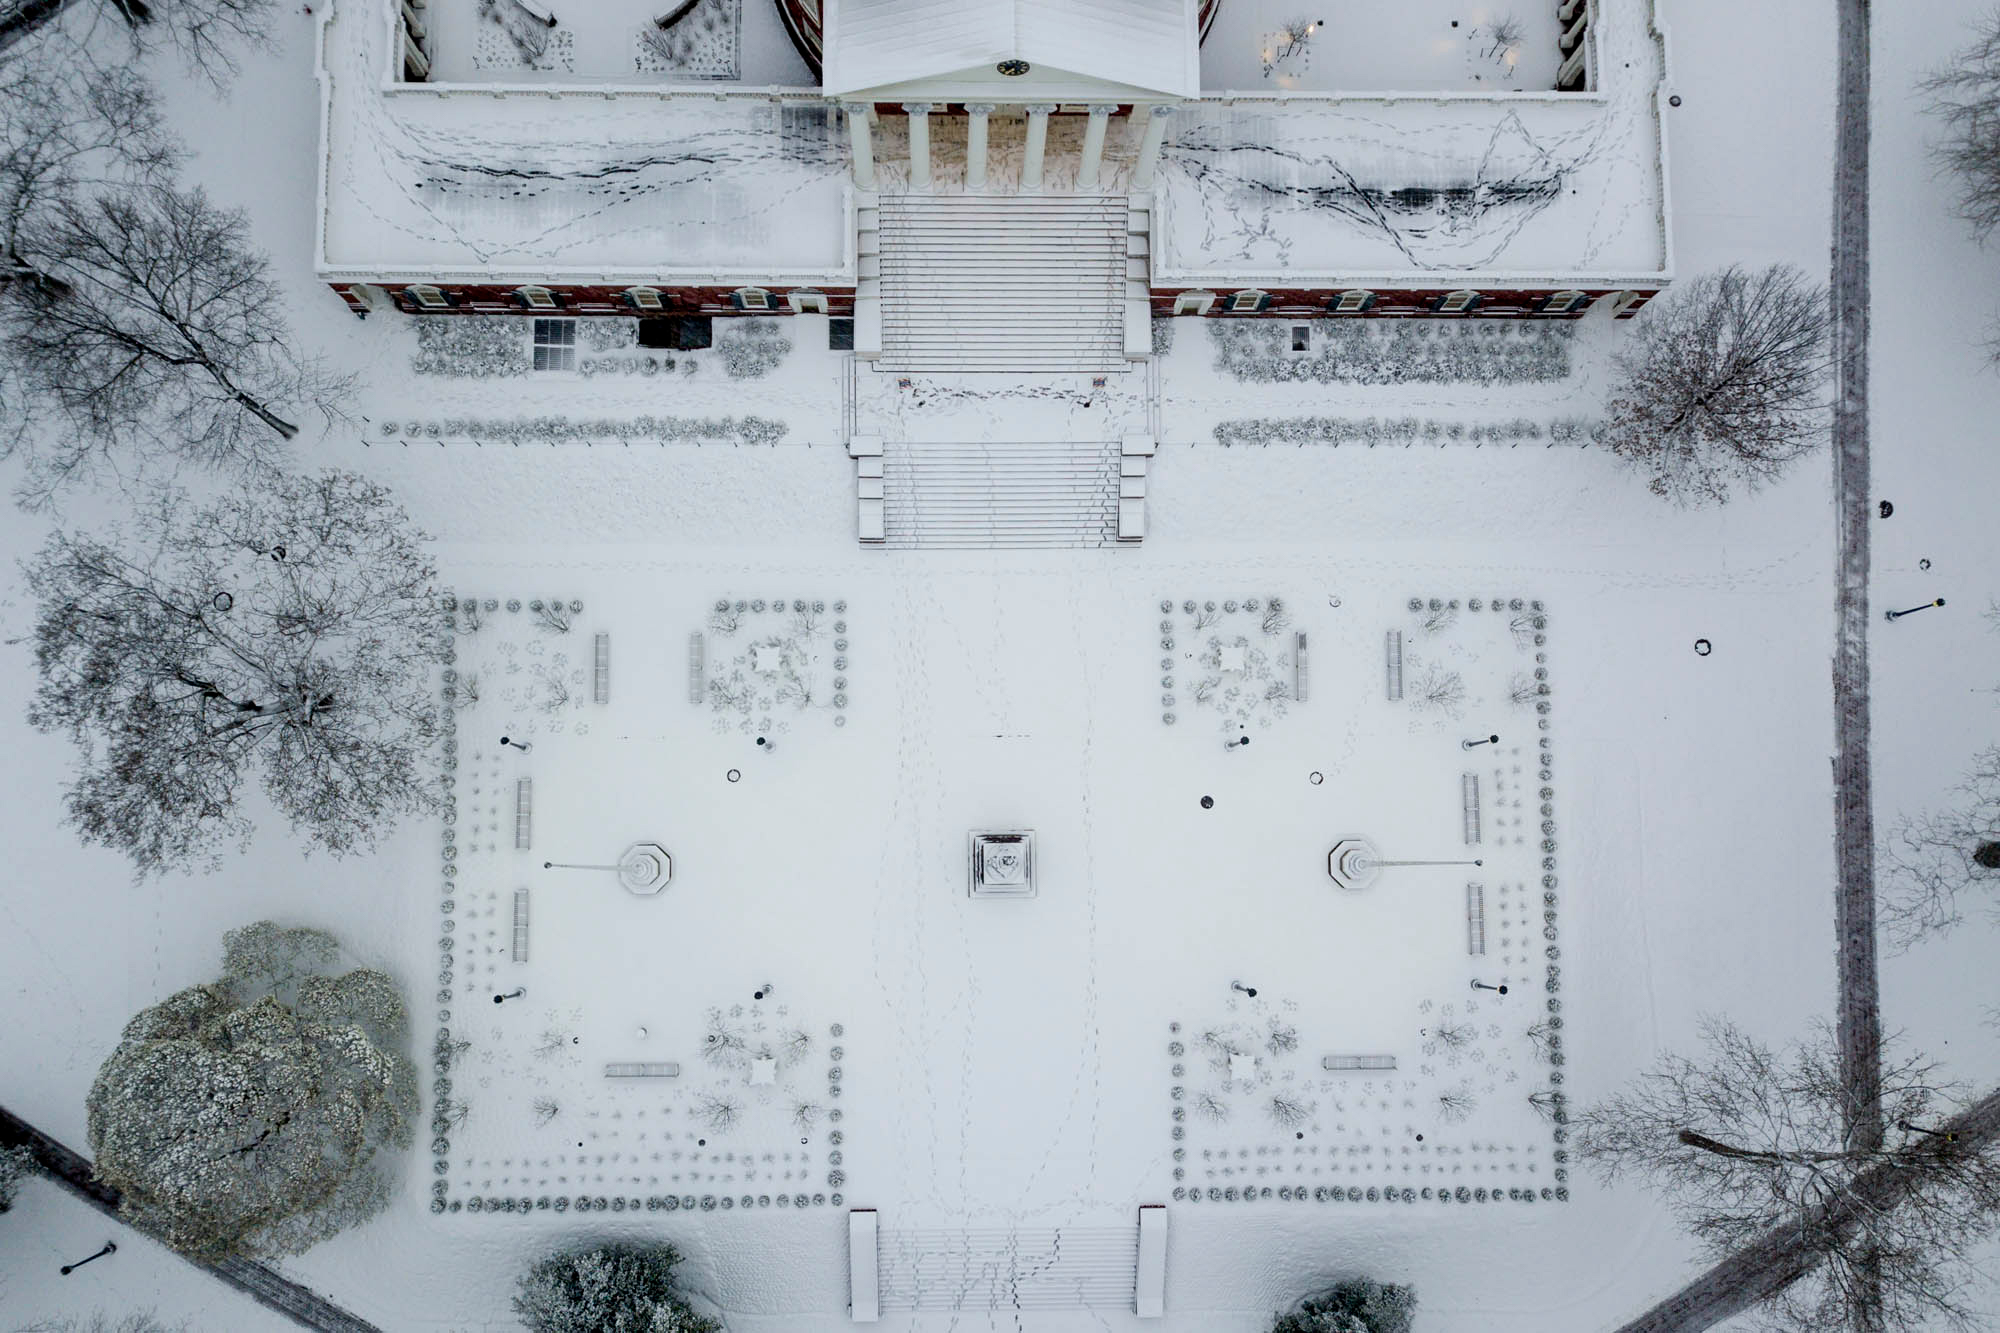 Aerial view of a building in the snow